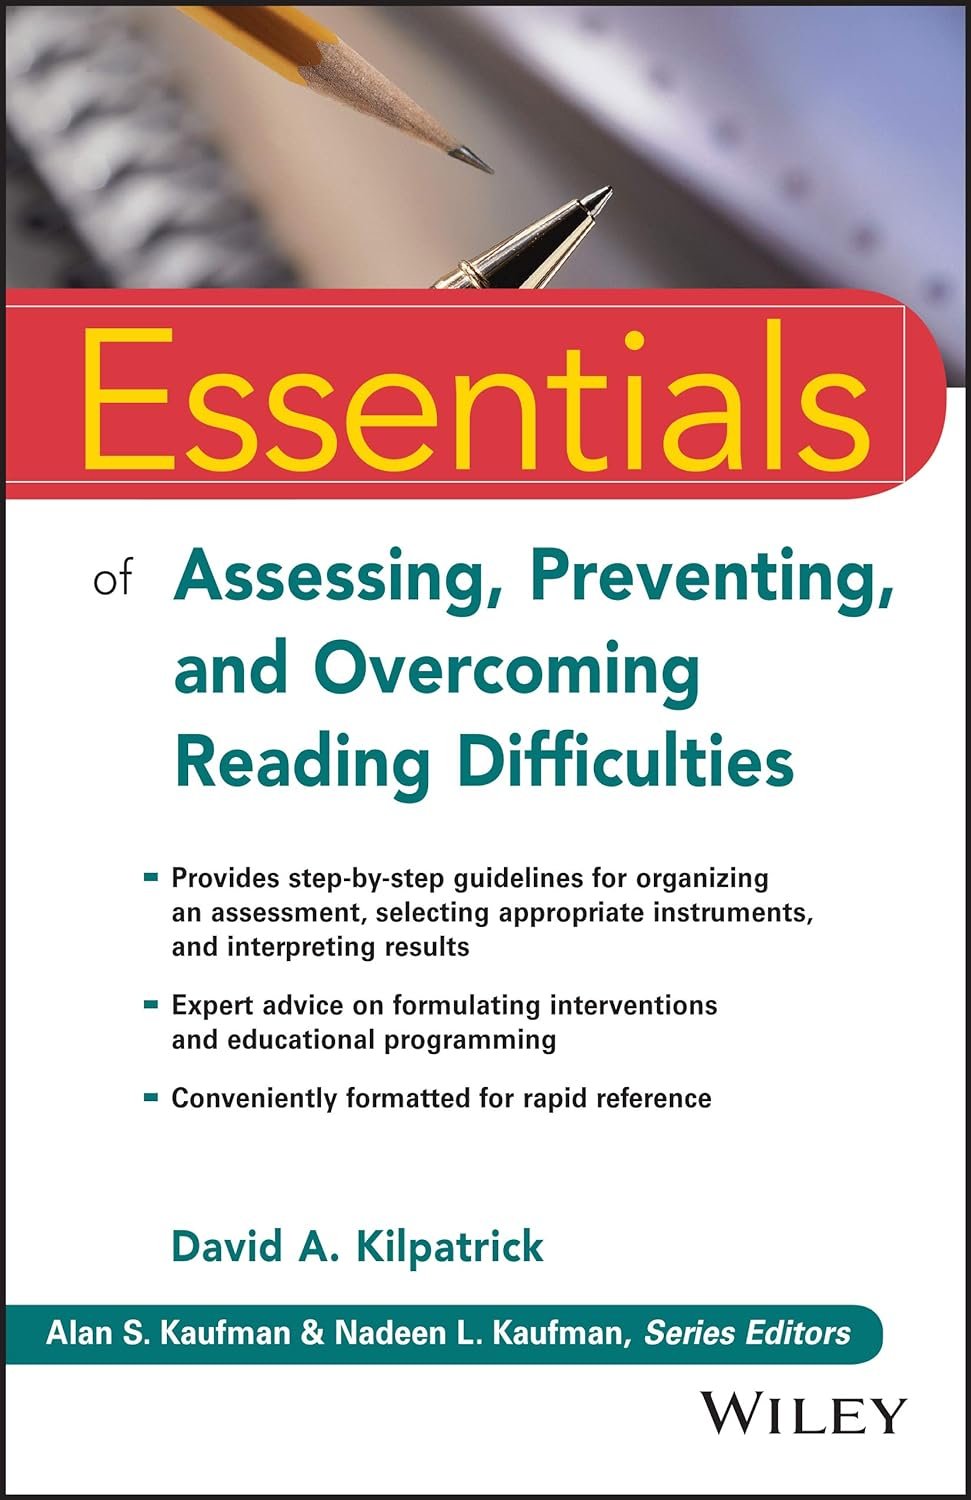 Essentials of Assessing, Preventing and Overcoming Reading Difficulties,.jpg